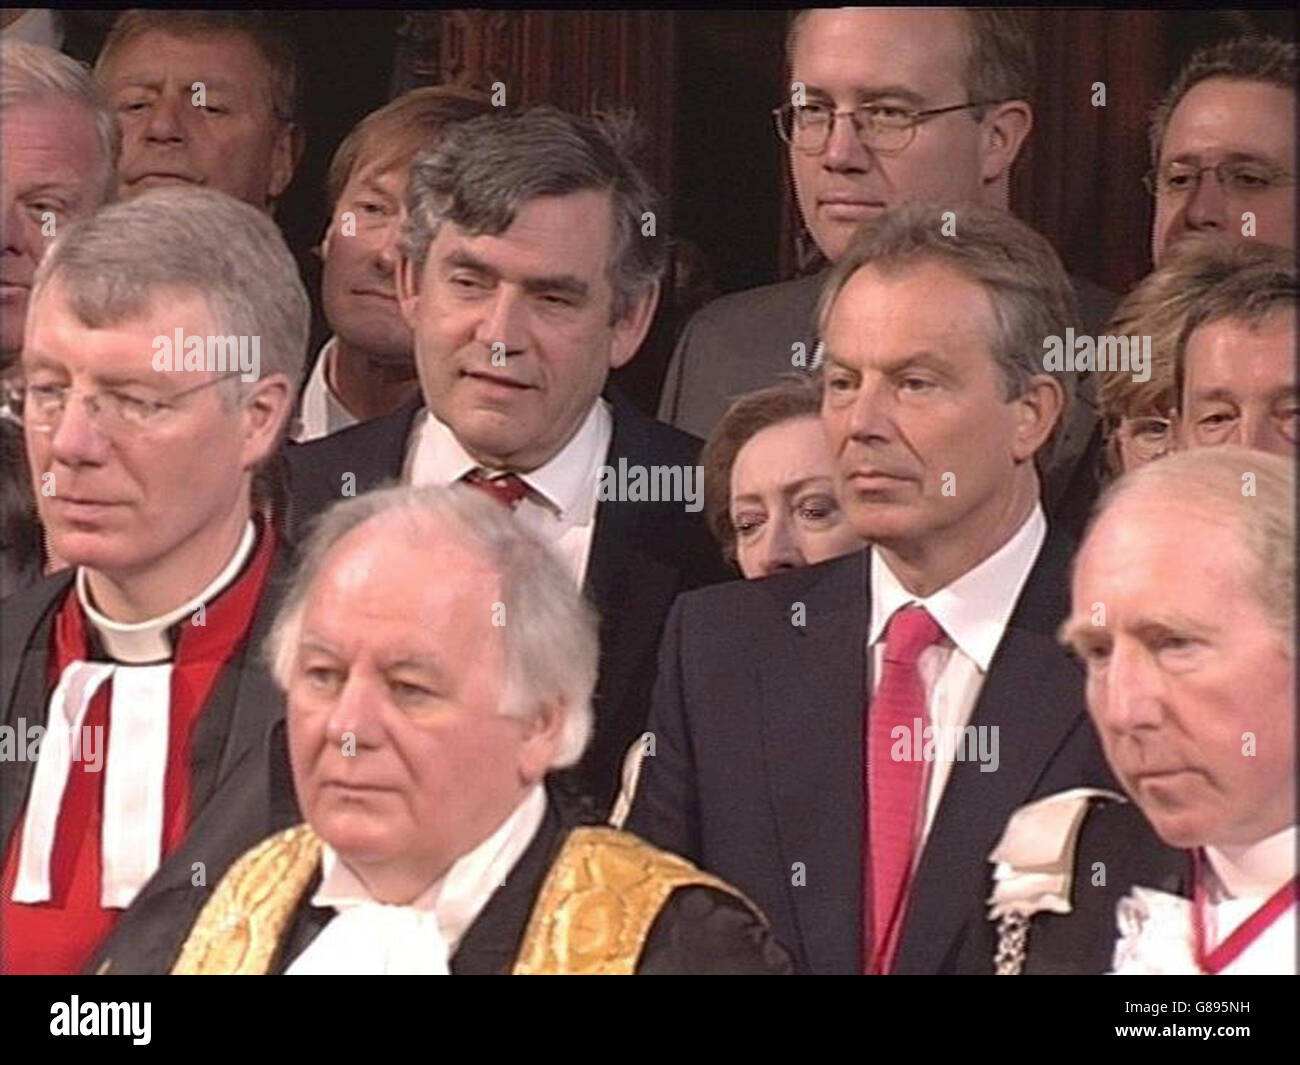 British Prime Minister Tony Blair (centre right) and Chancellor of the Exchequer Gordon Brown (centre left) listen as Britain's Queen Elizabeth II makes a speech in the House of Lords during the State Opening of Parliament in which she outlined the government's legislative programme for the new parliamentary session following the Labour Party's return to power in the General Election earlier this month. Stock Photo